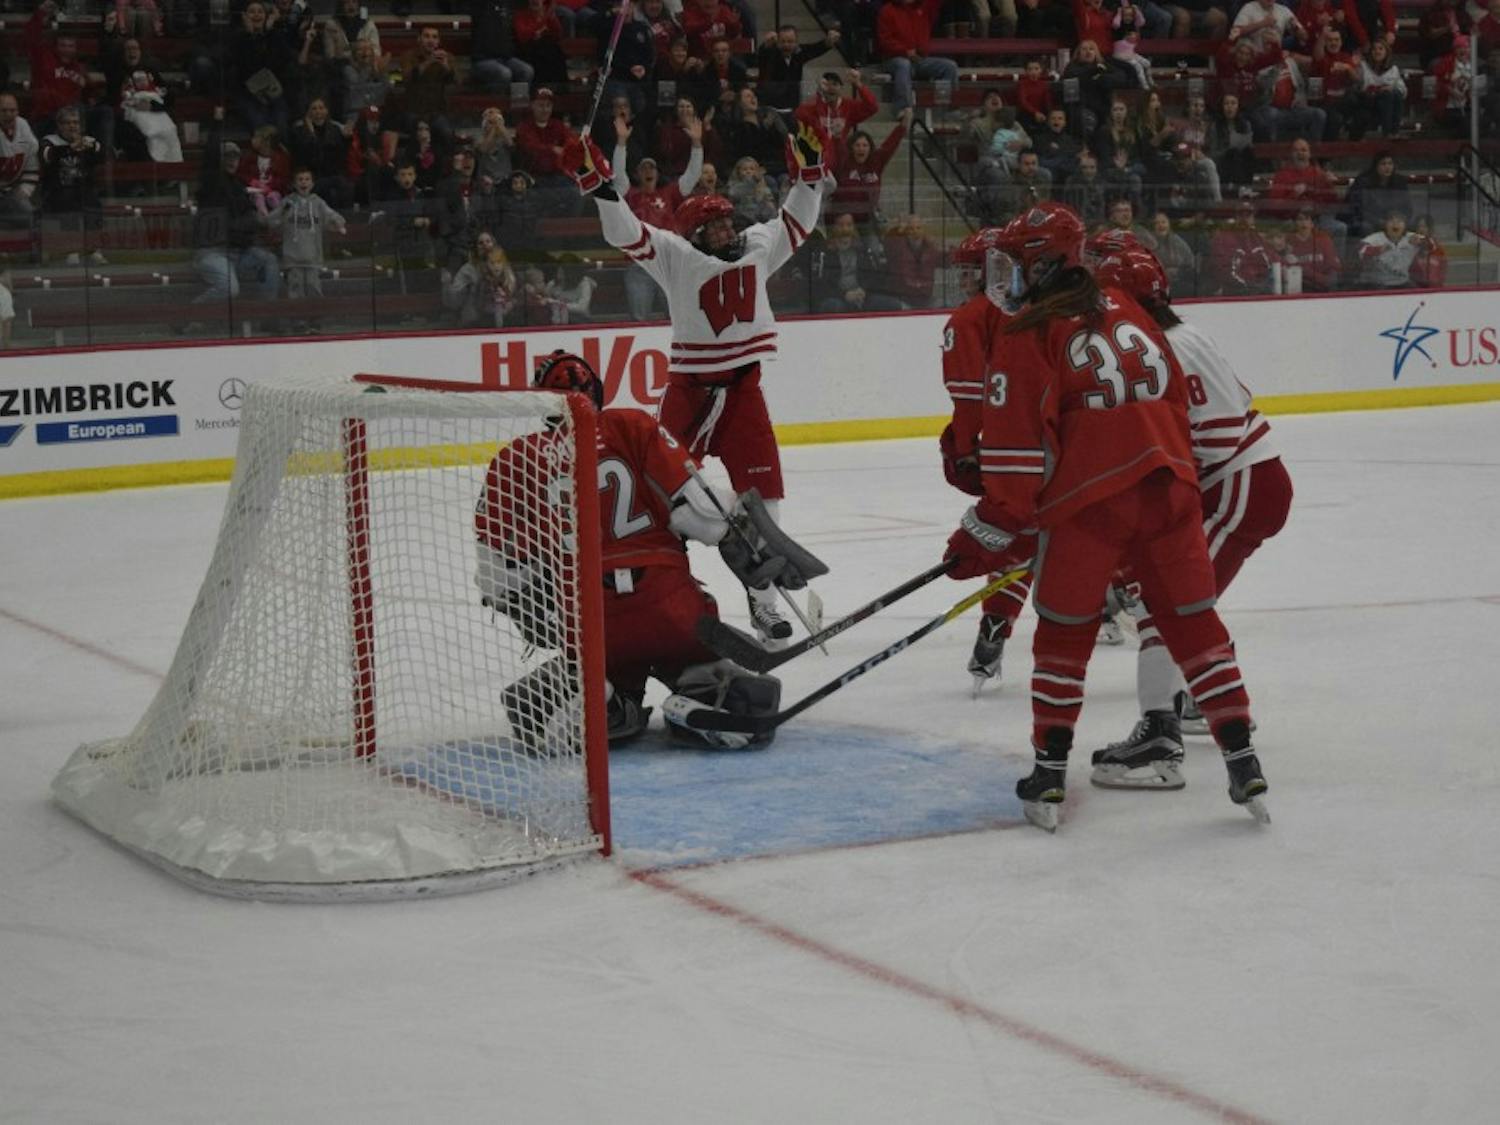 Wisconsin avoided snapping its 26-game home-winning streak thanks to a goal with under two minutes remaining.&nbsp;